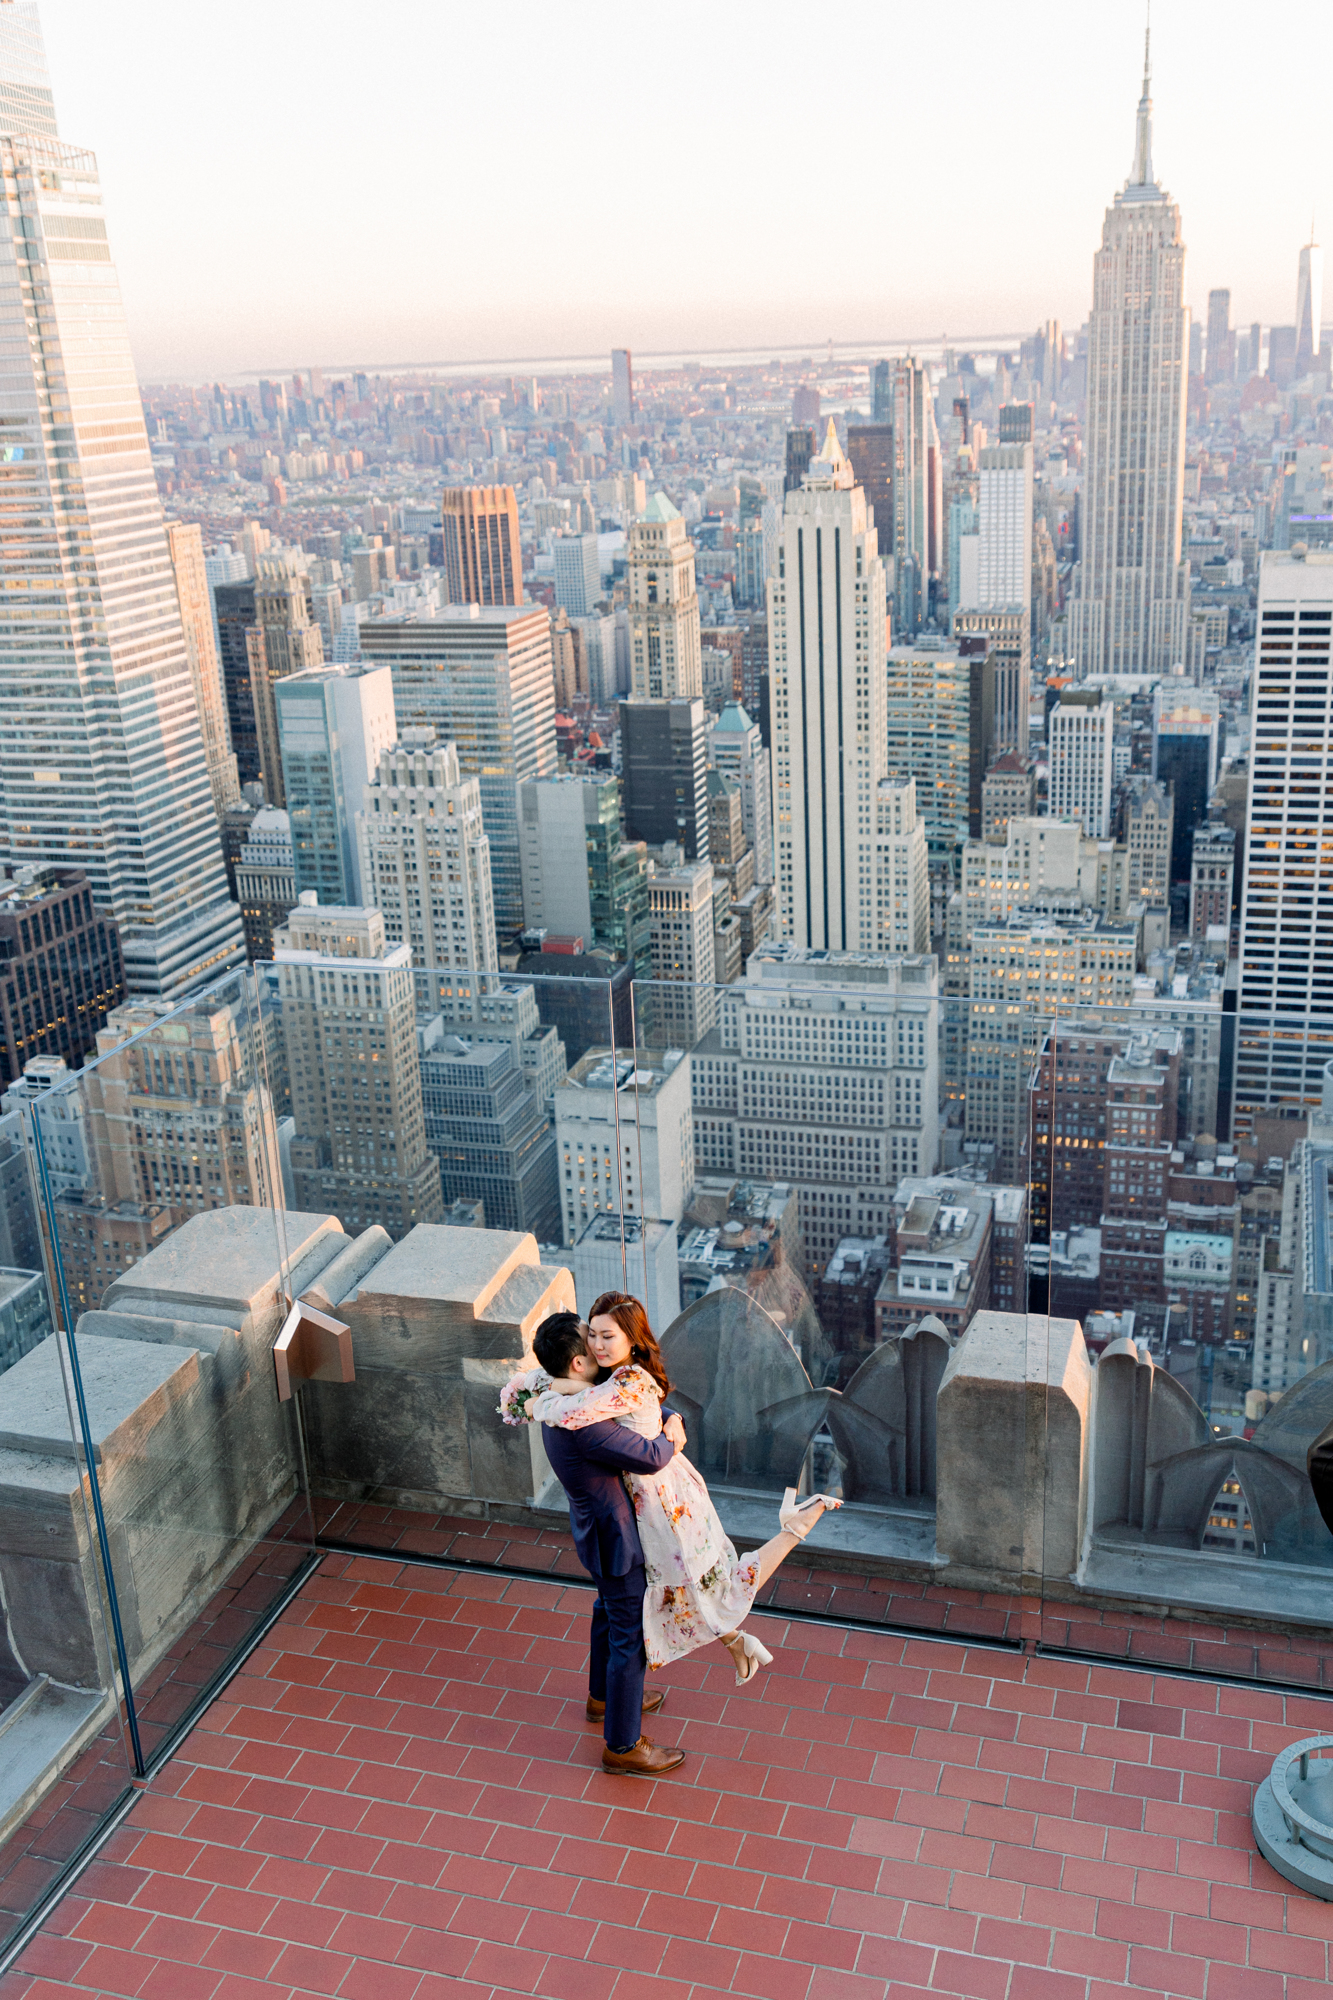 Striking Top of the Rock Engagement Photography at Sunset in NYC